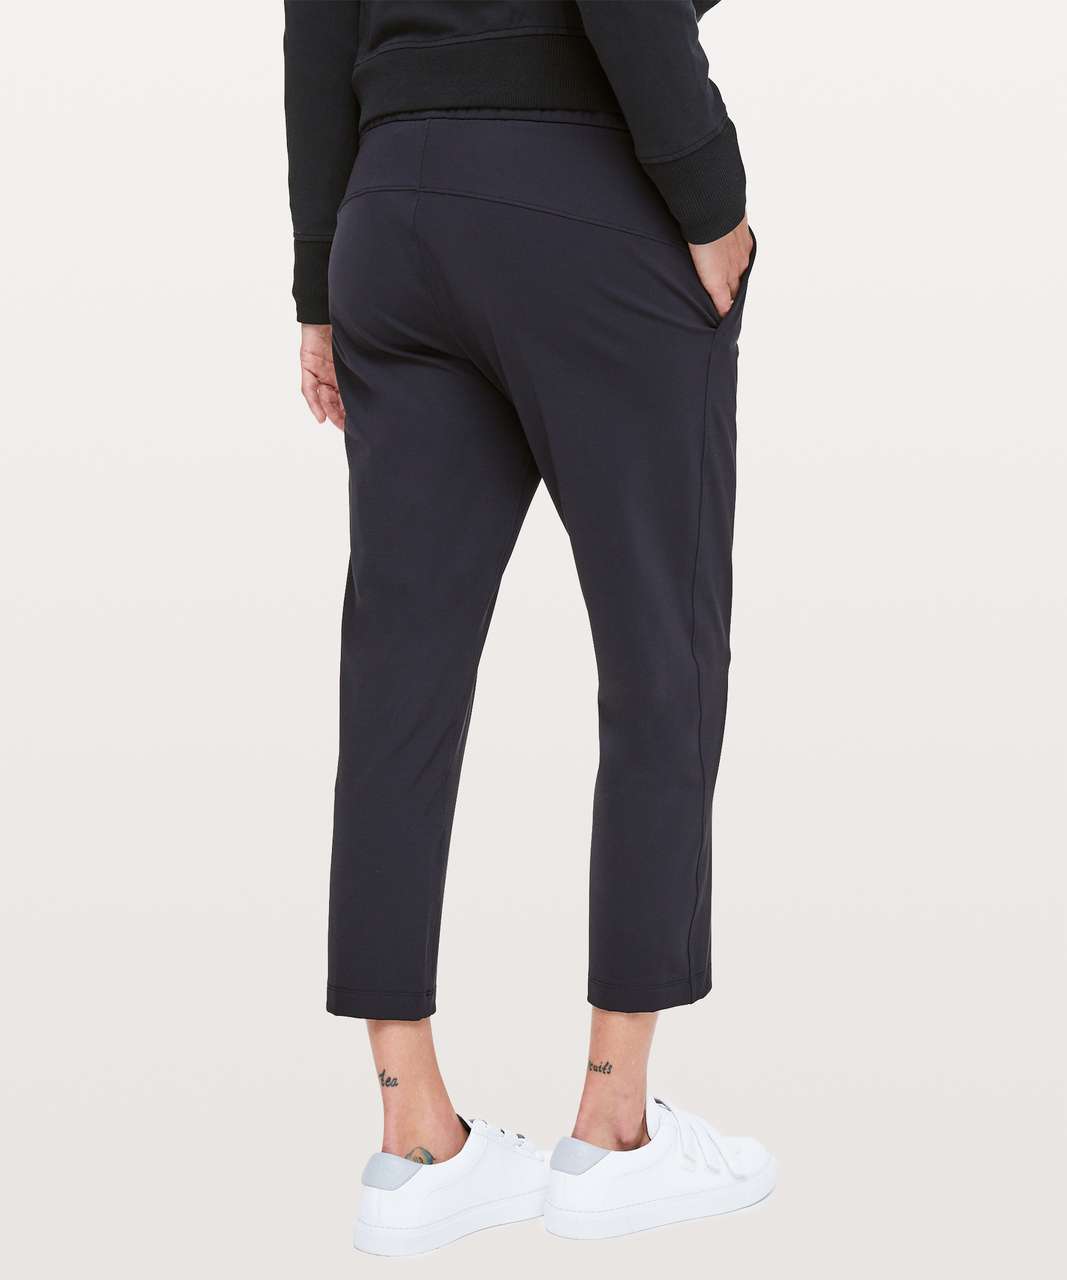 Did Lululemon Discontinue the On the Fly Pants? - Playbite